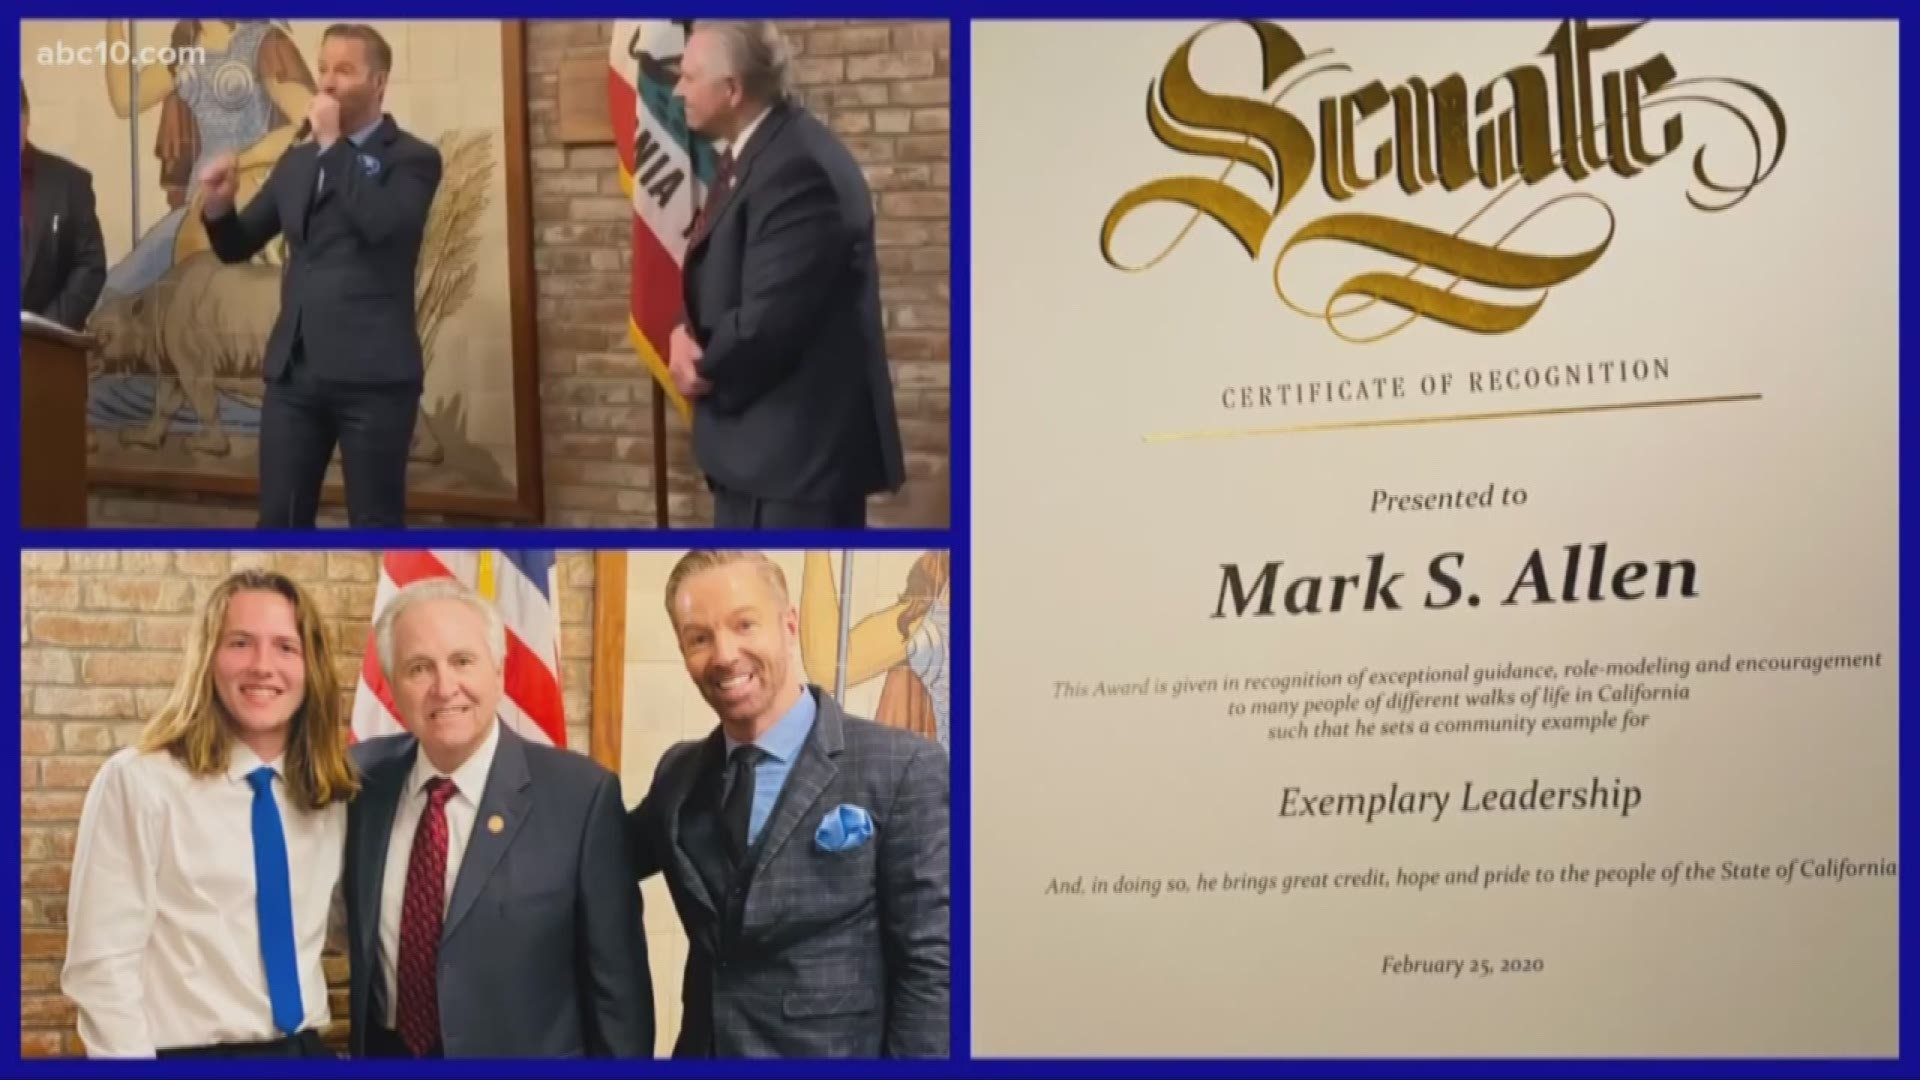 California awards Mark for leadership "given in recognition of exceptional guidance, role modeling & encouragement to many people of different walks of life..."